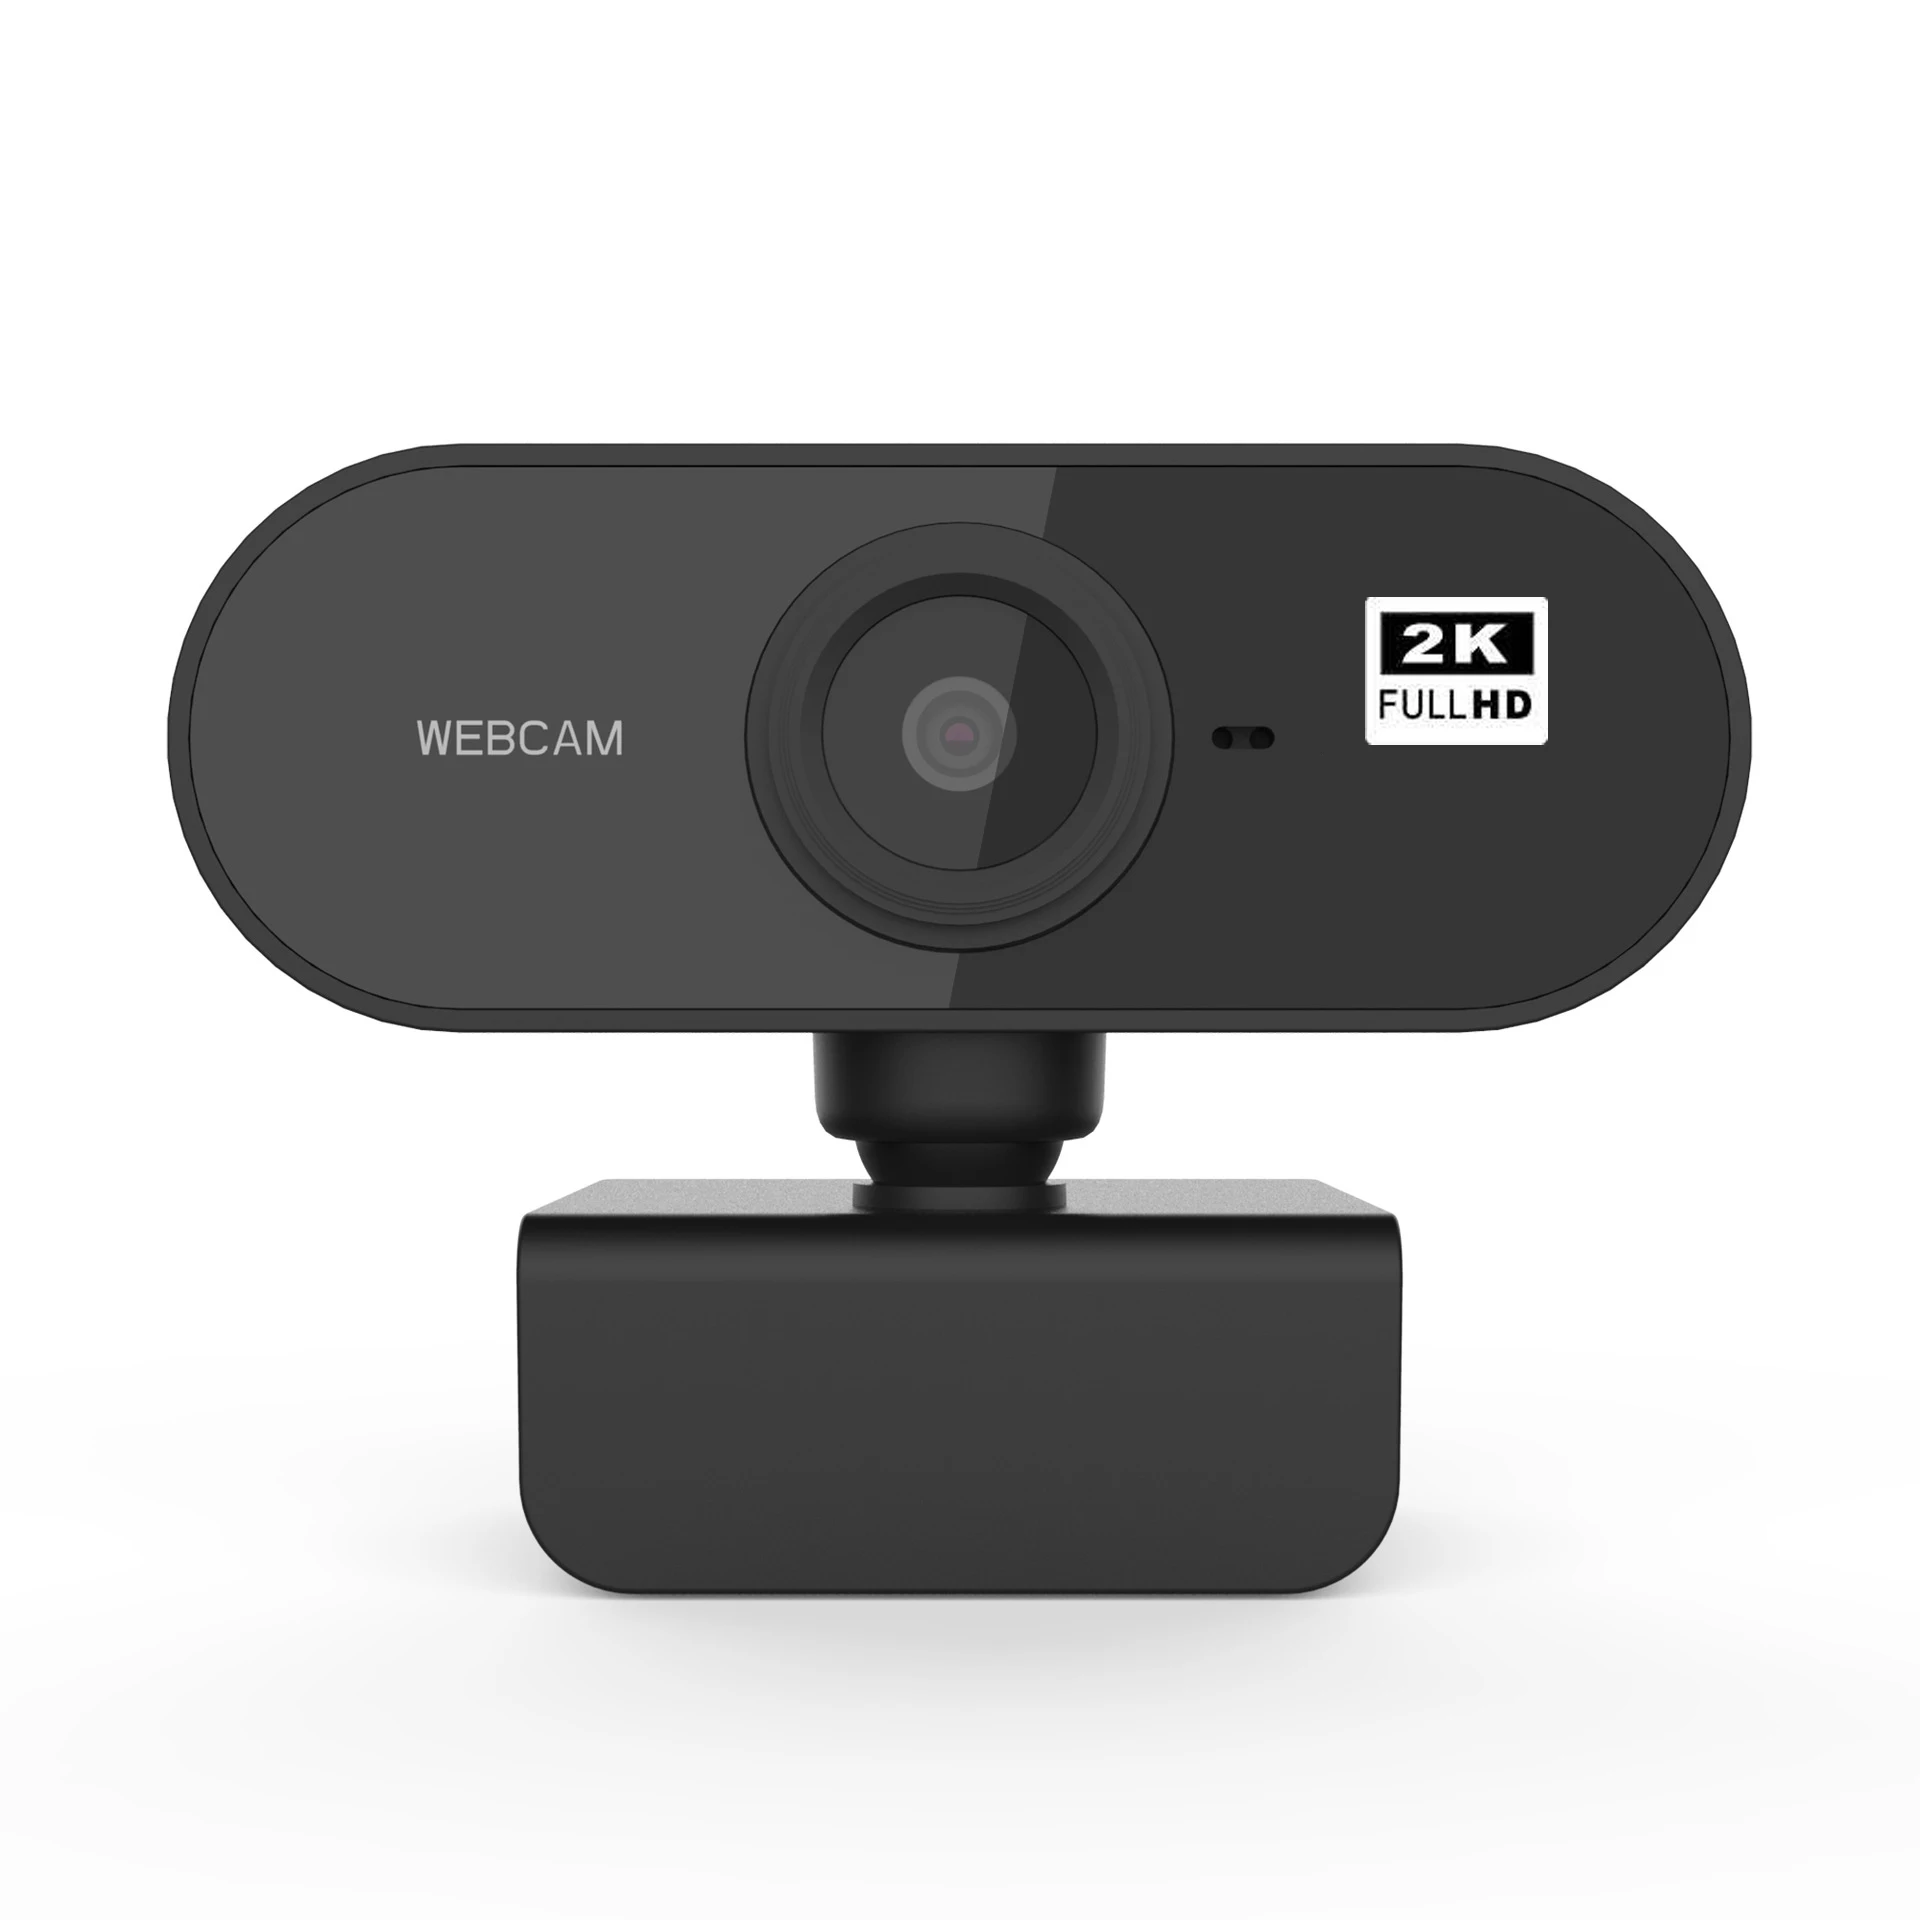 Source 2K Webcam Full HD USB Driver Web Camera with Microphone for Laptop Computer Video Conference on m.alibaba.com